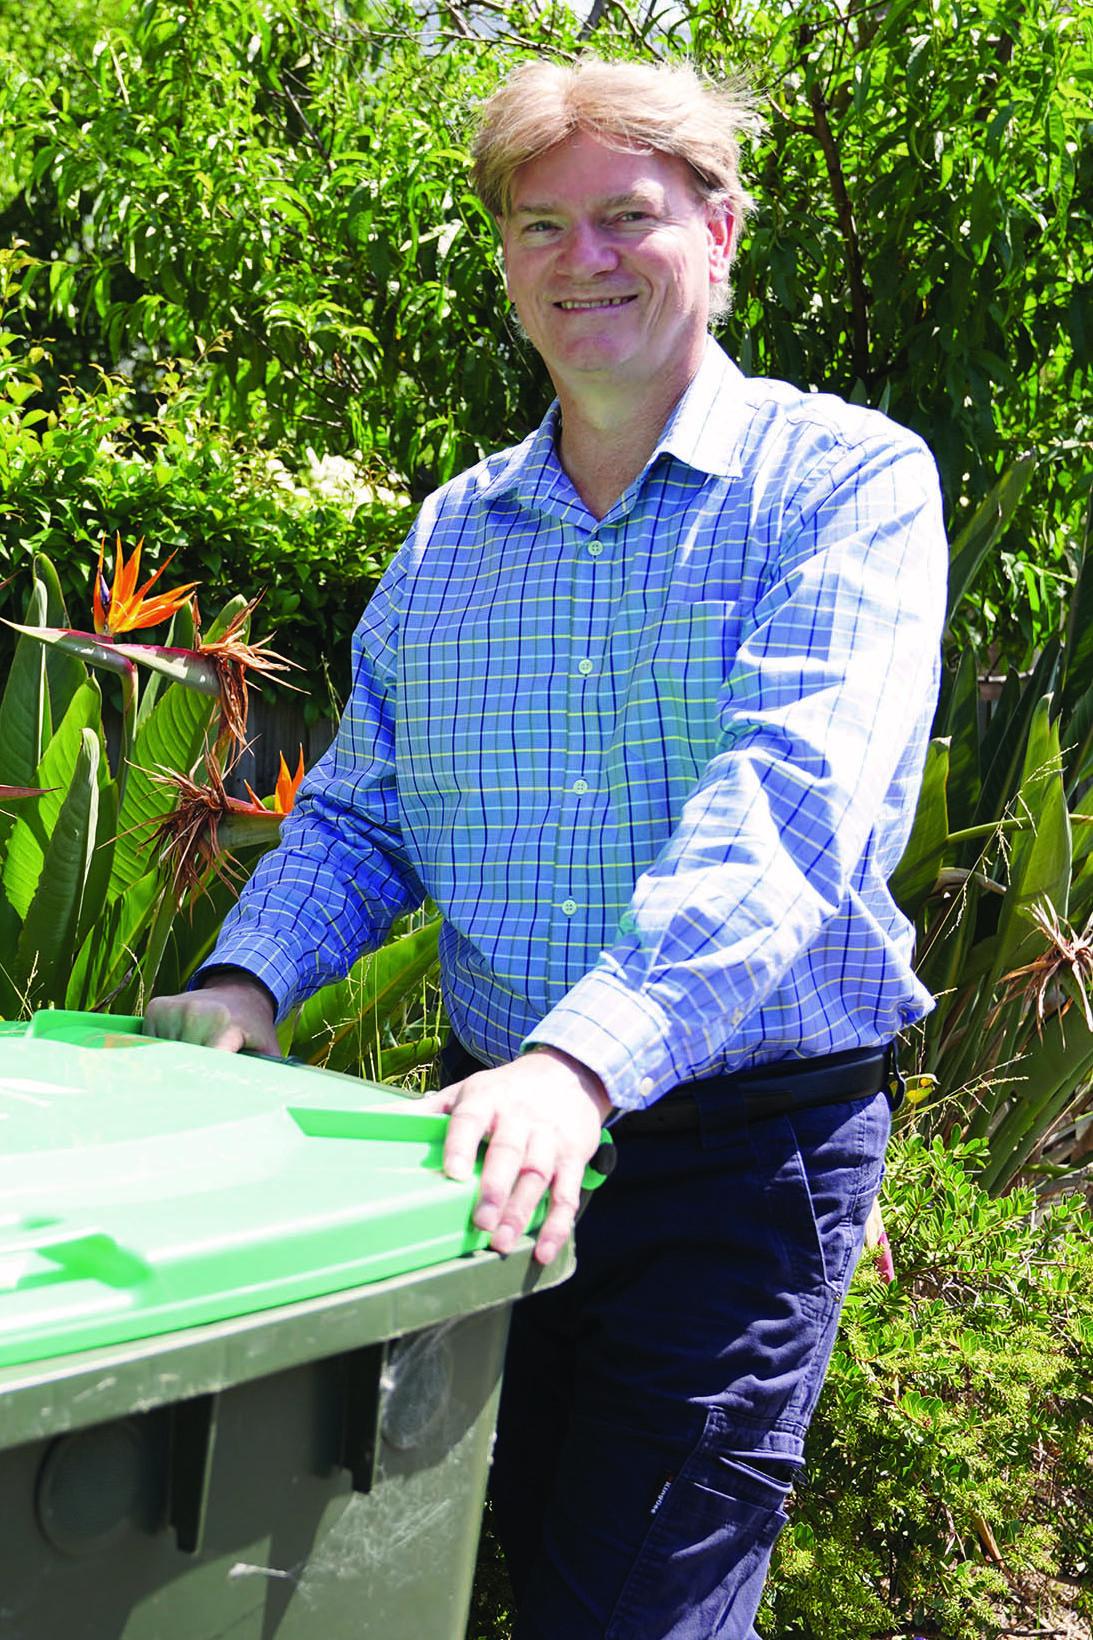 A smiling middle-aged man wearing a blue checked shirt pushes a green waste bin in a garden setting